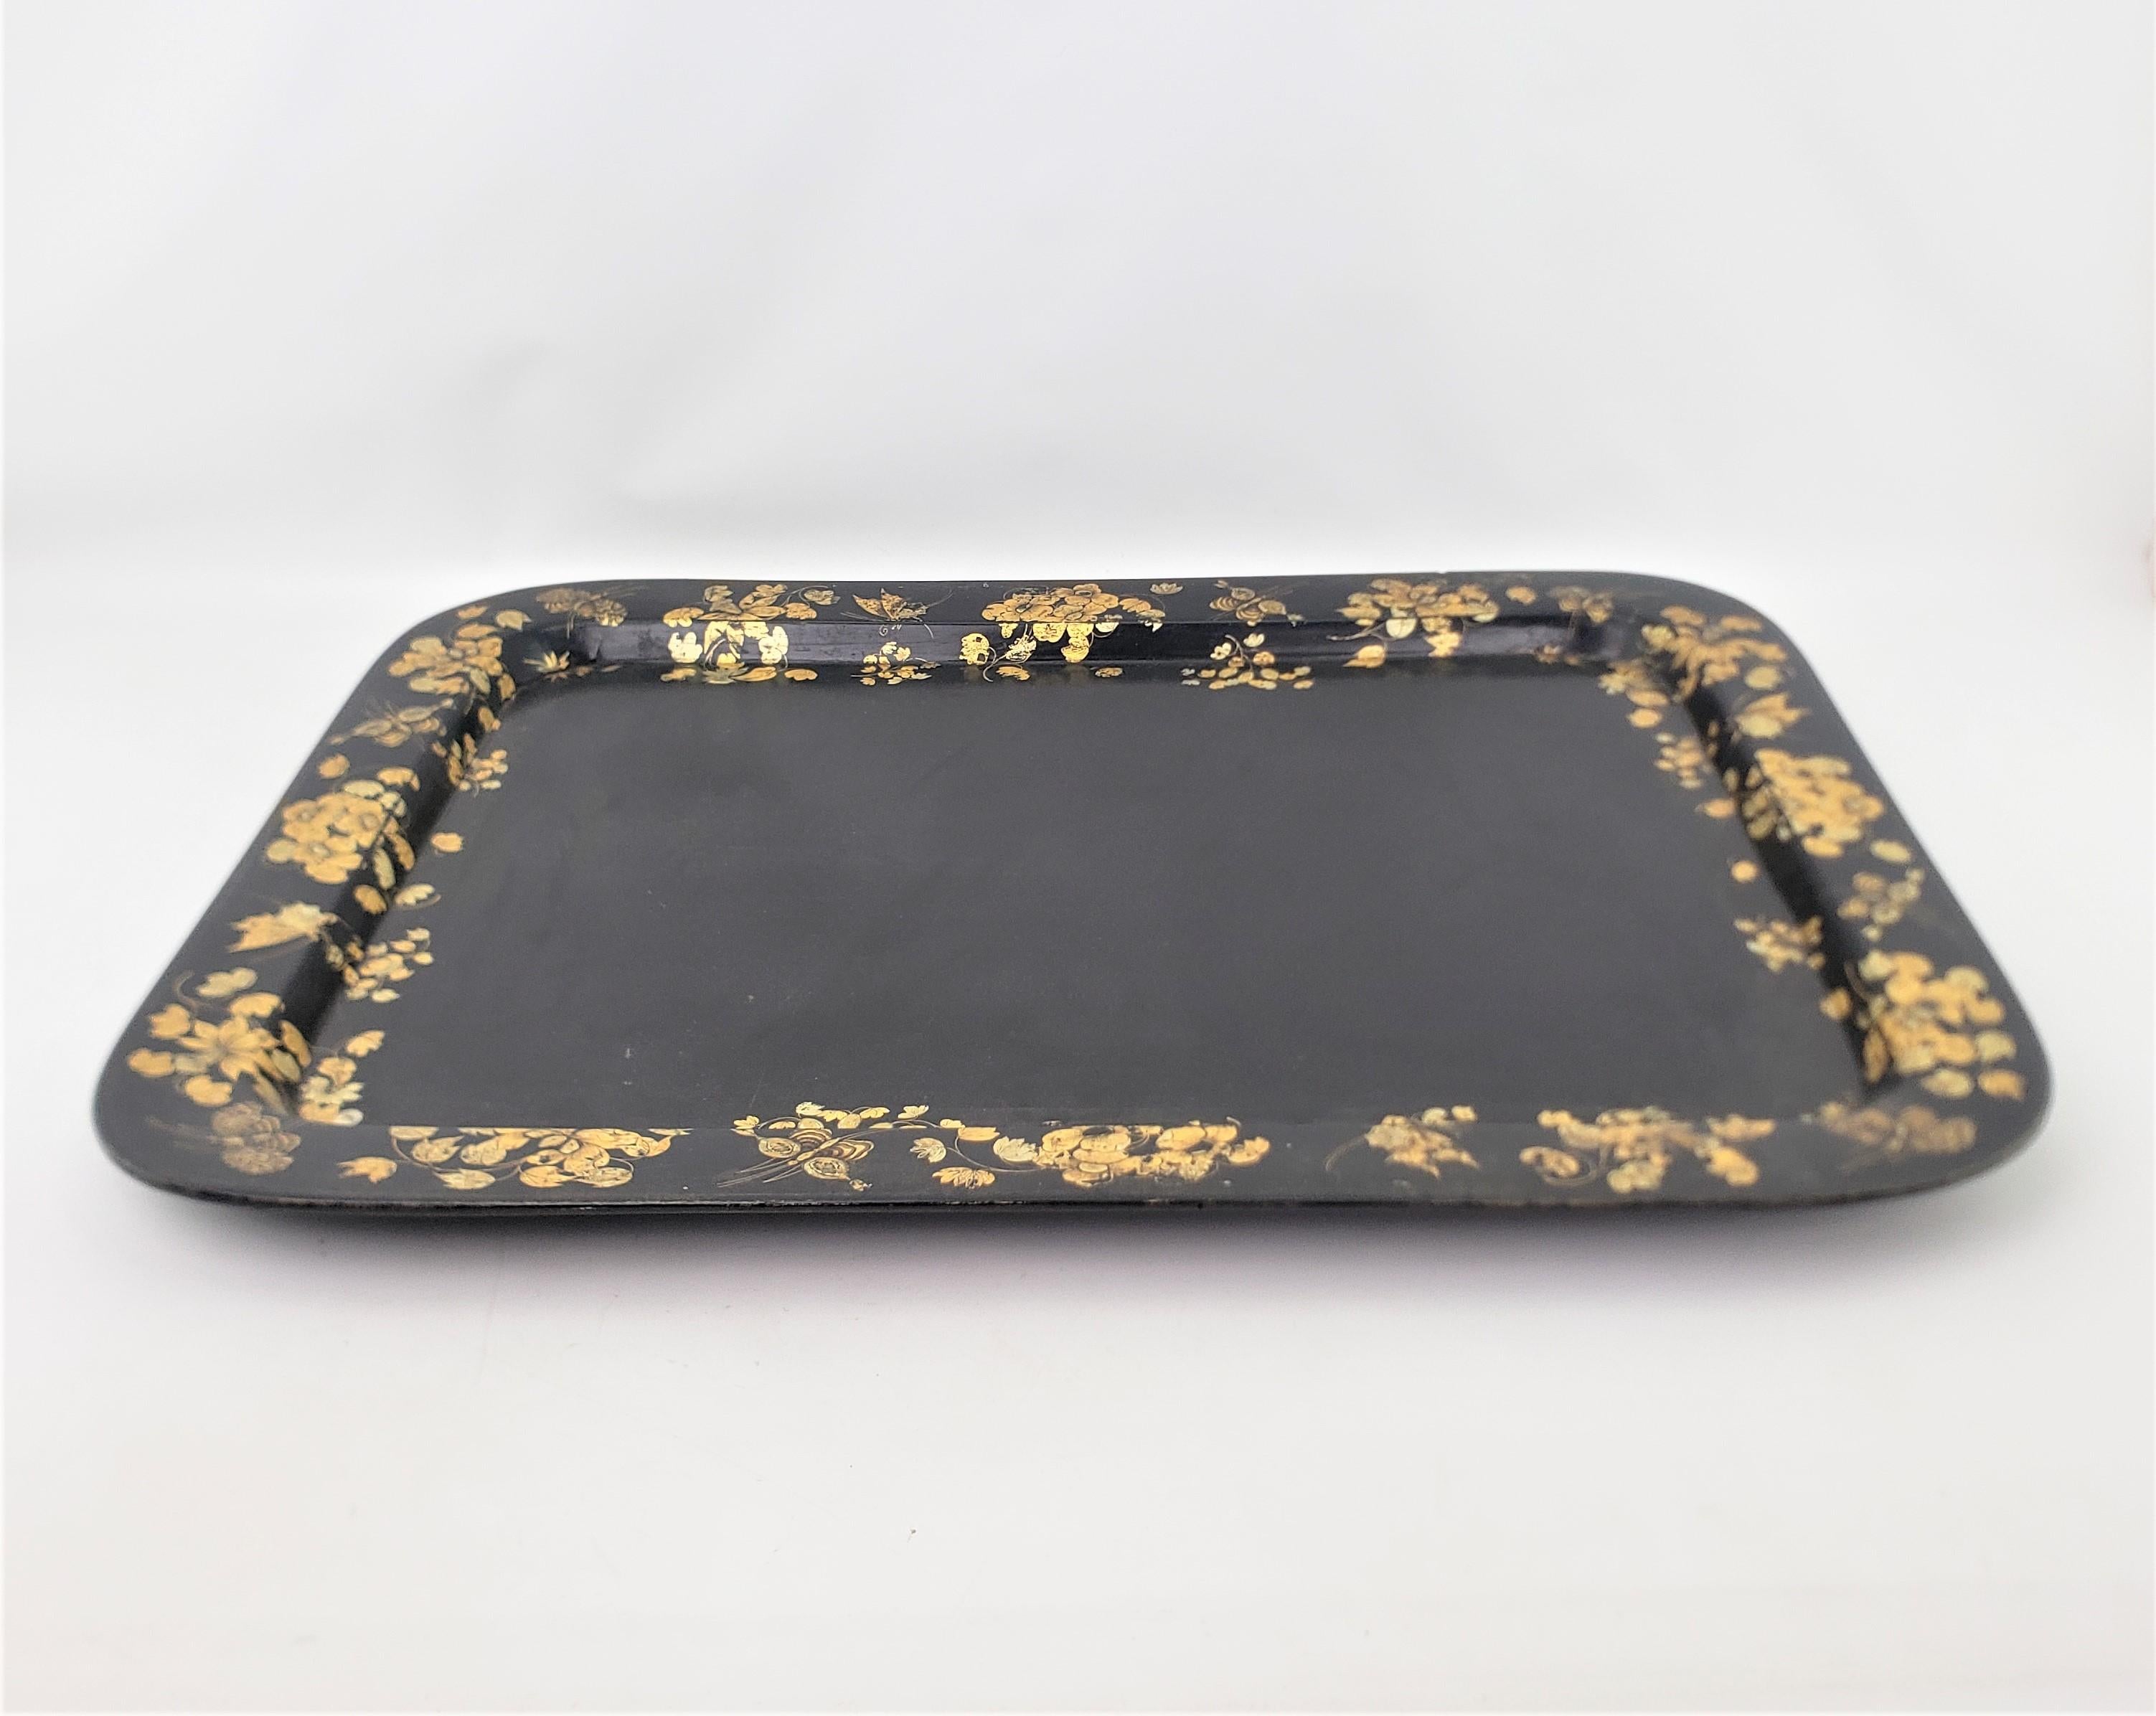 This extremely large antique serving tray is unsigned, but presumed to have originated from England and date to approximately 1880 and done in the period Late Victorian style. The tray is composed of paper mache with a polished black lacquer finish